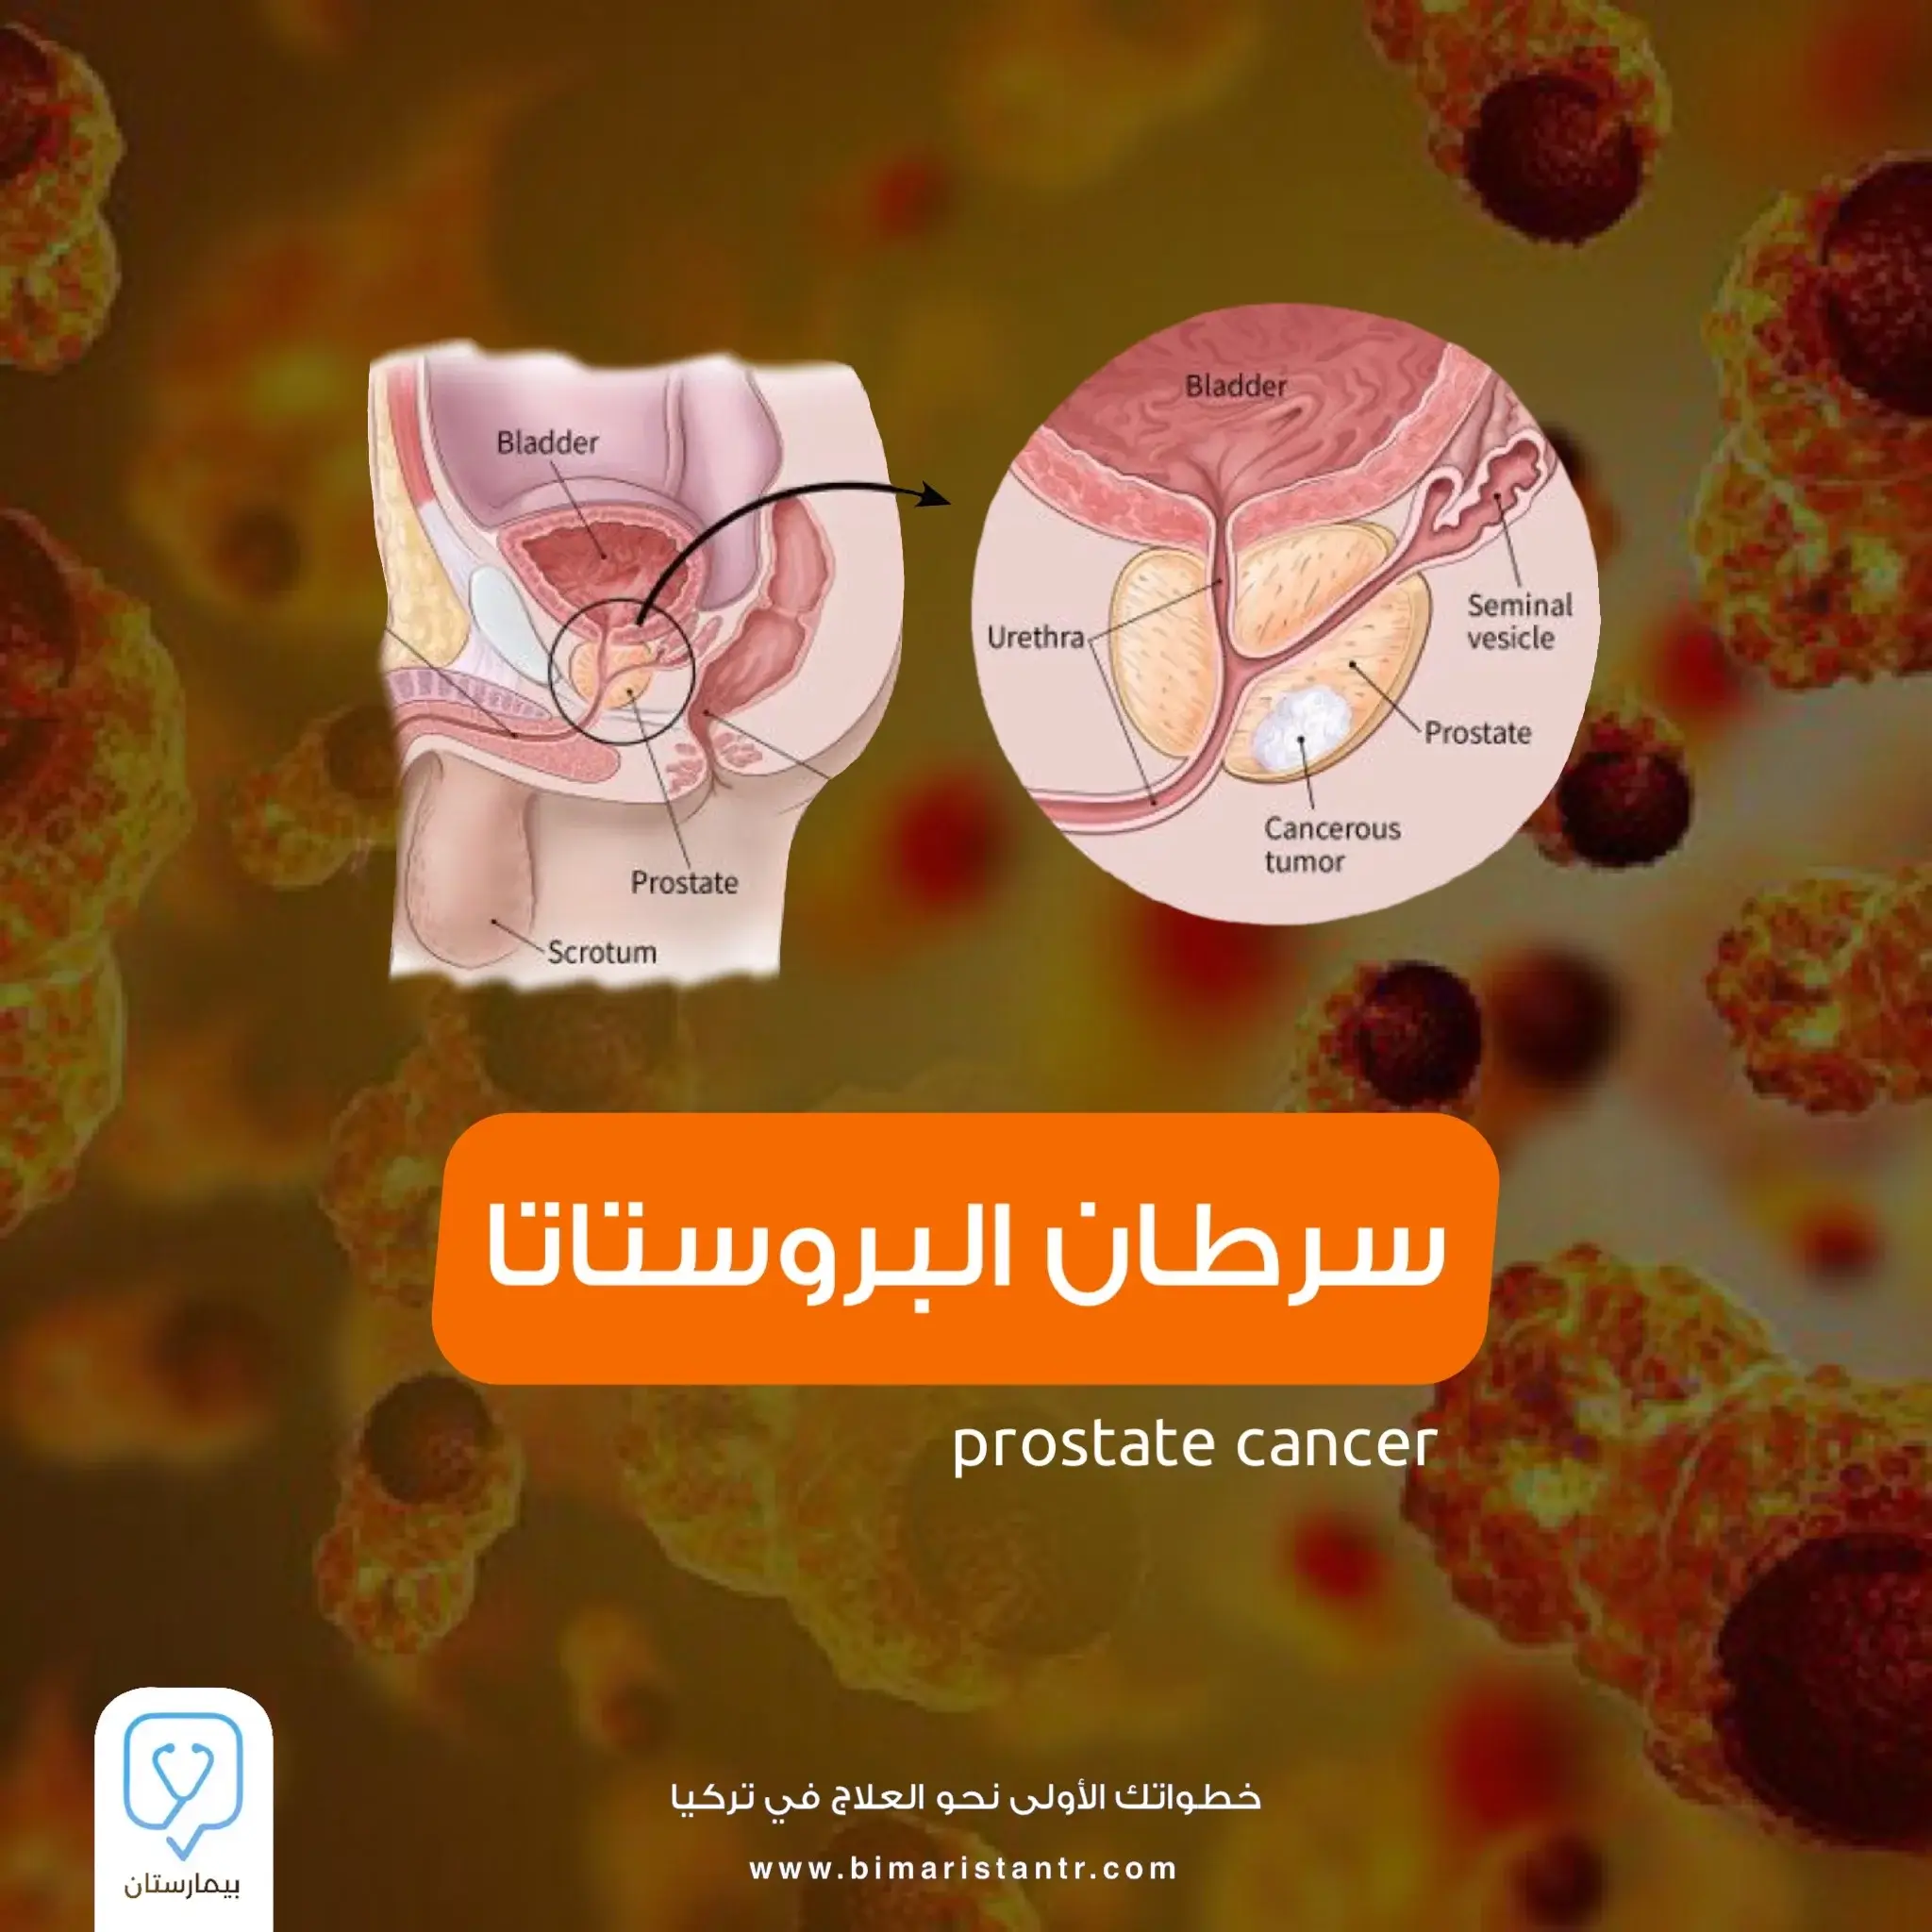 All you need to know about prostate cancer